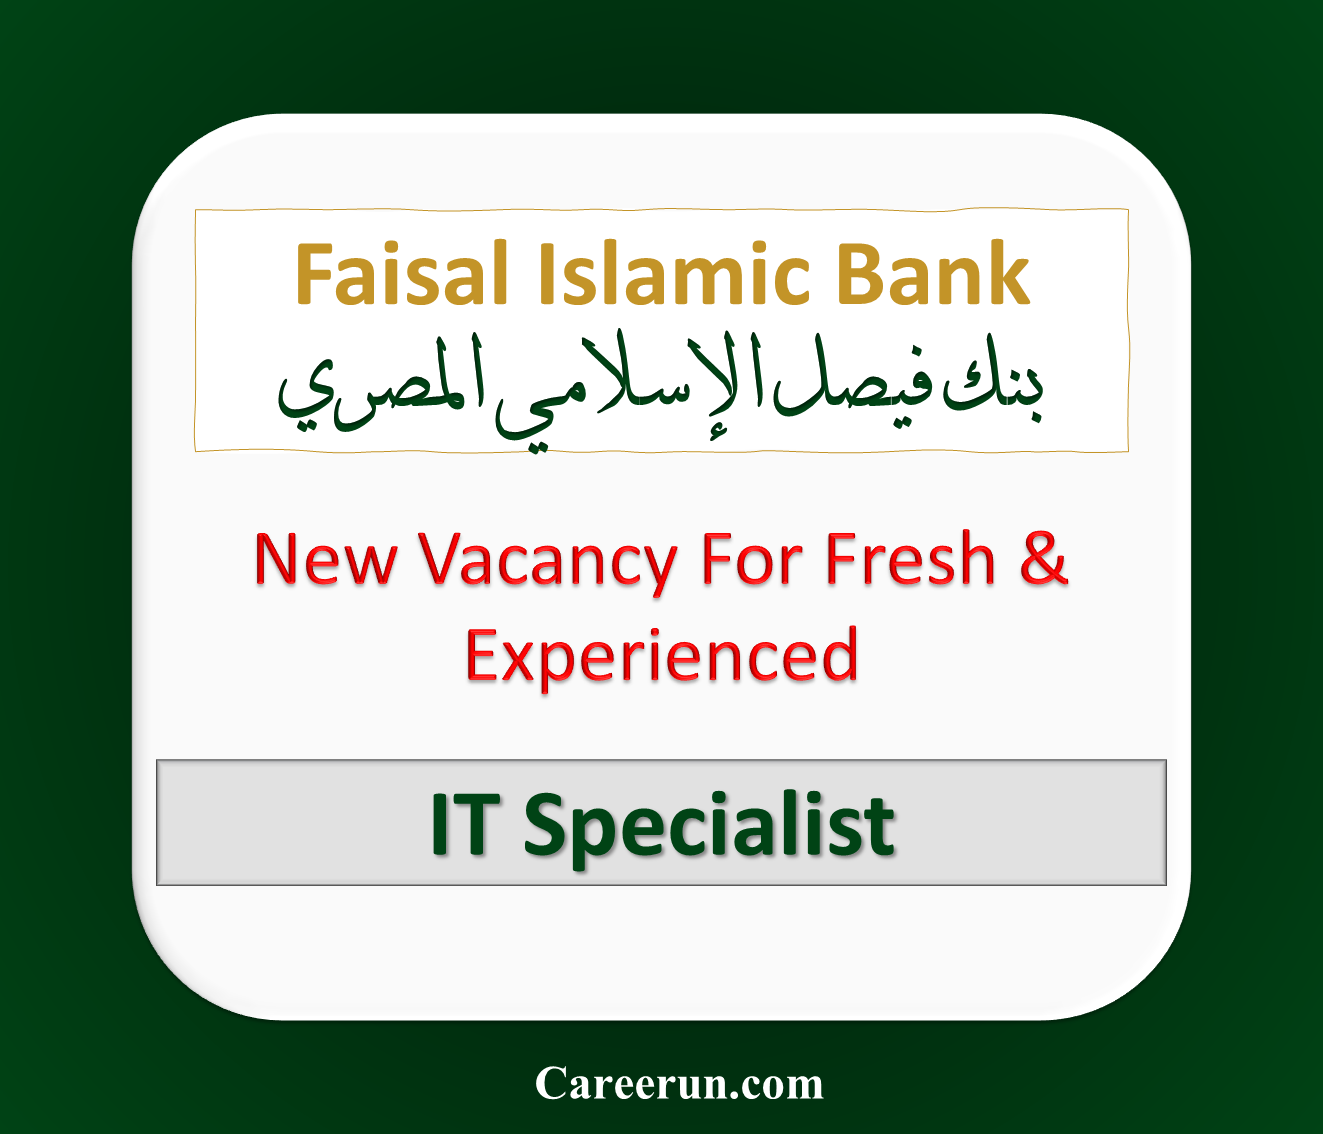 IT Specialist at Faisal Islamic Bank